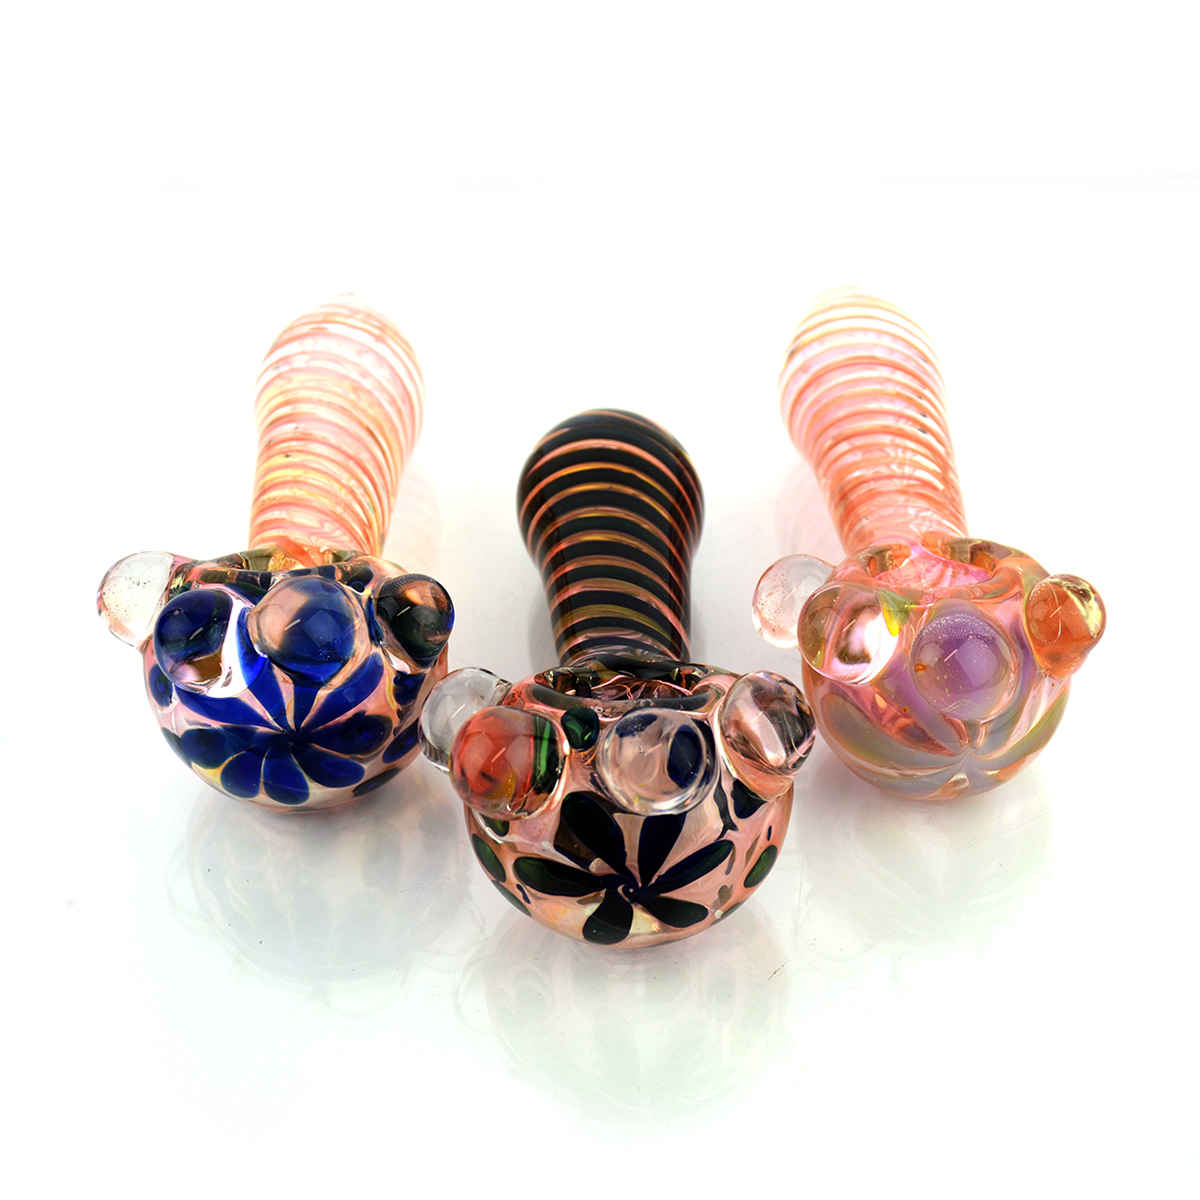 5" Gold Fume Hand Pipe With Swirling Art and Flower Head Design 200G